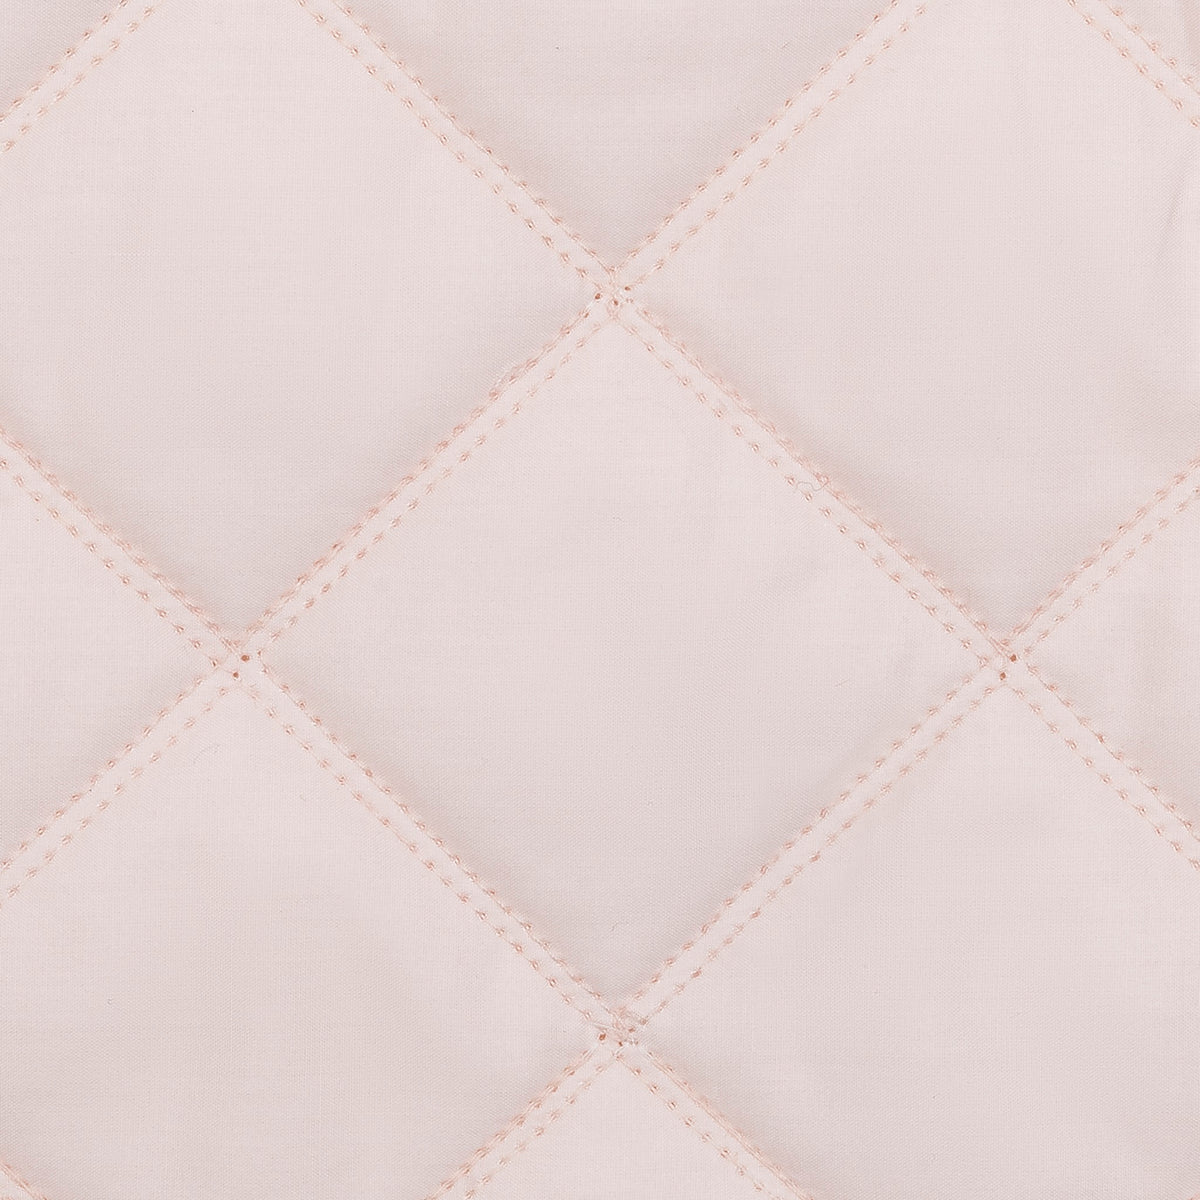 Swatch Sample of Matouk Milano Quilt Bedding in Color Blush